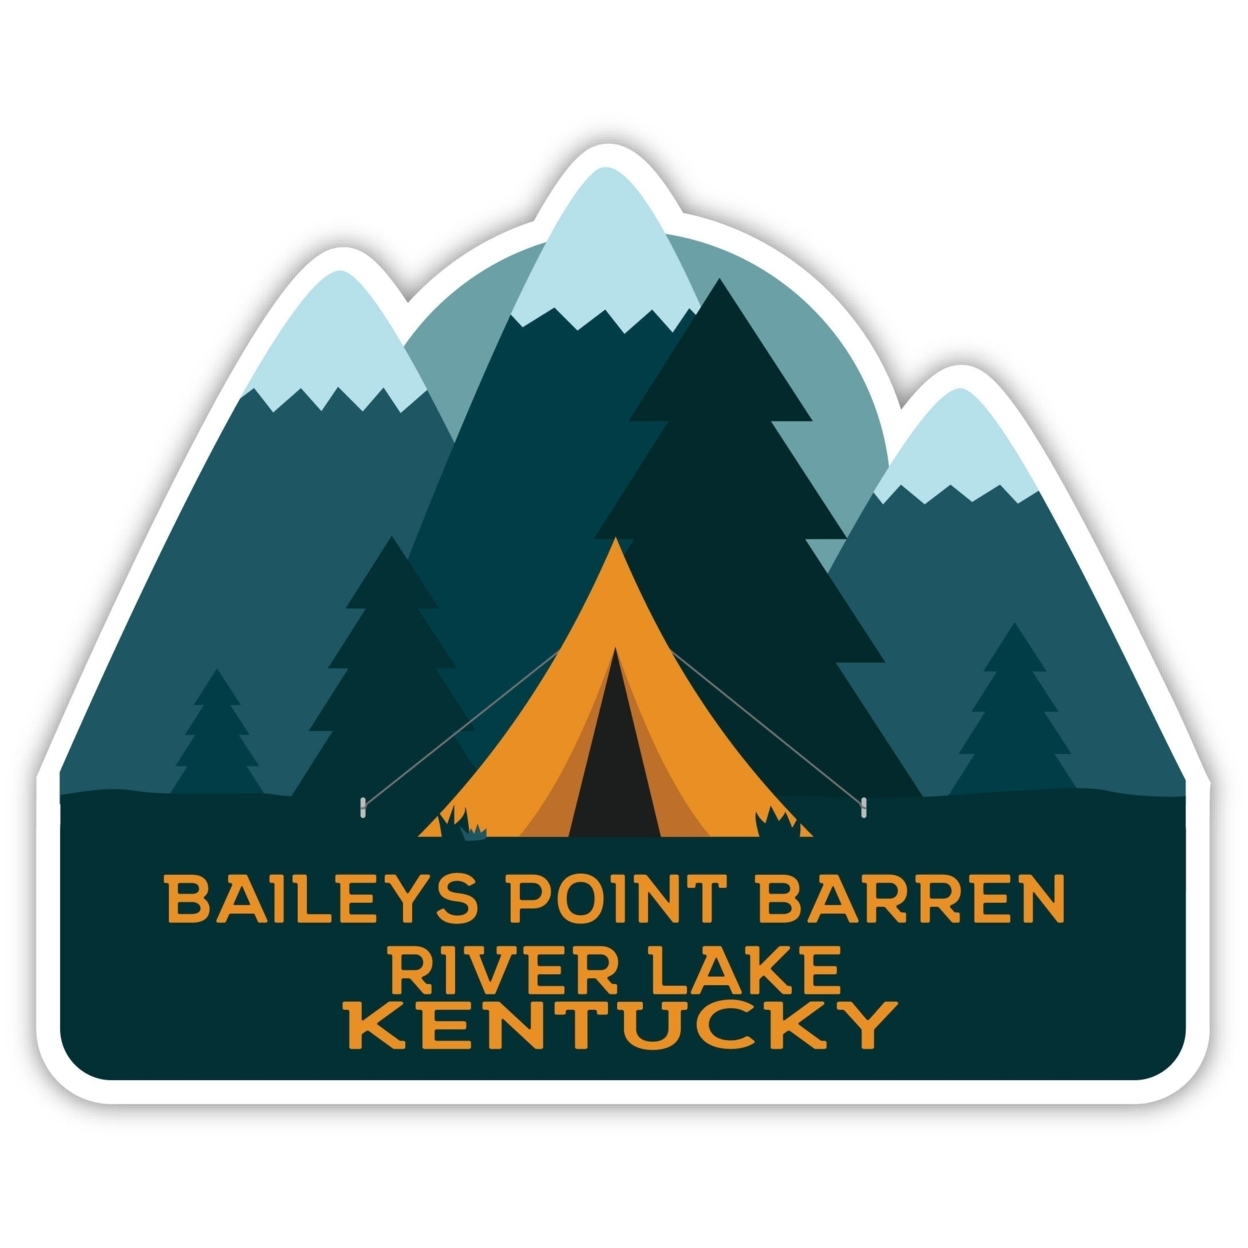 Baileys Point Barren River Lake Kentucky Souvenir Decorative Stickers (Choose Theme And Size) - 4-Pack, 2-Inch, Tent